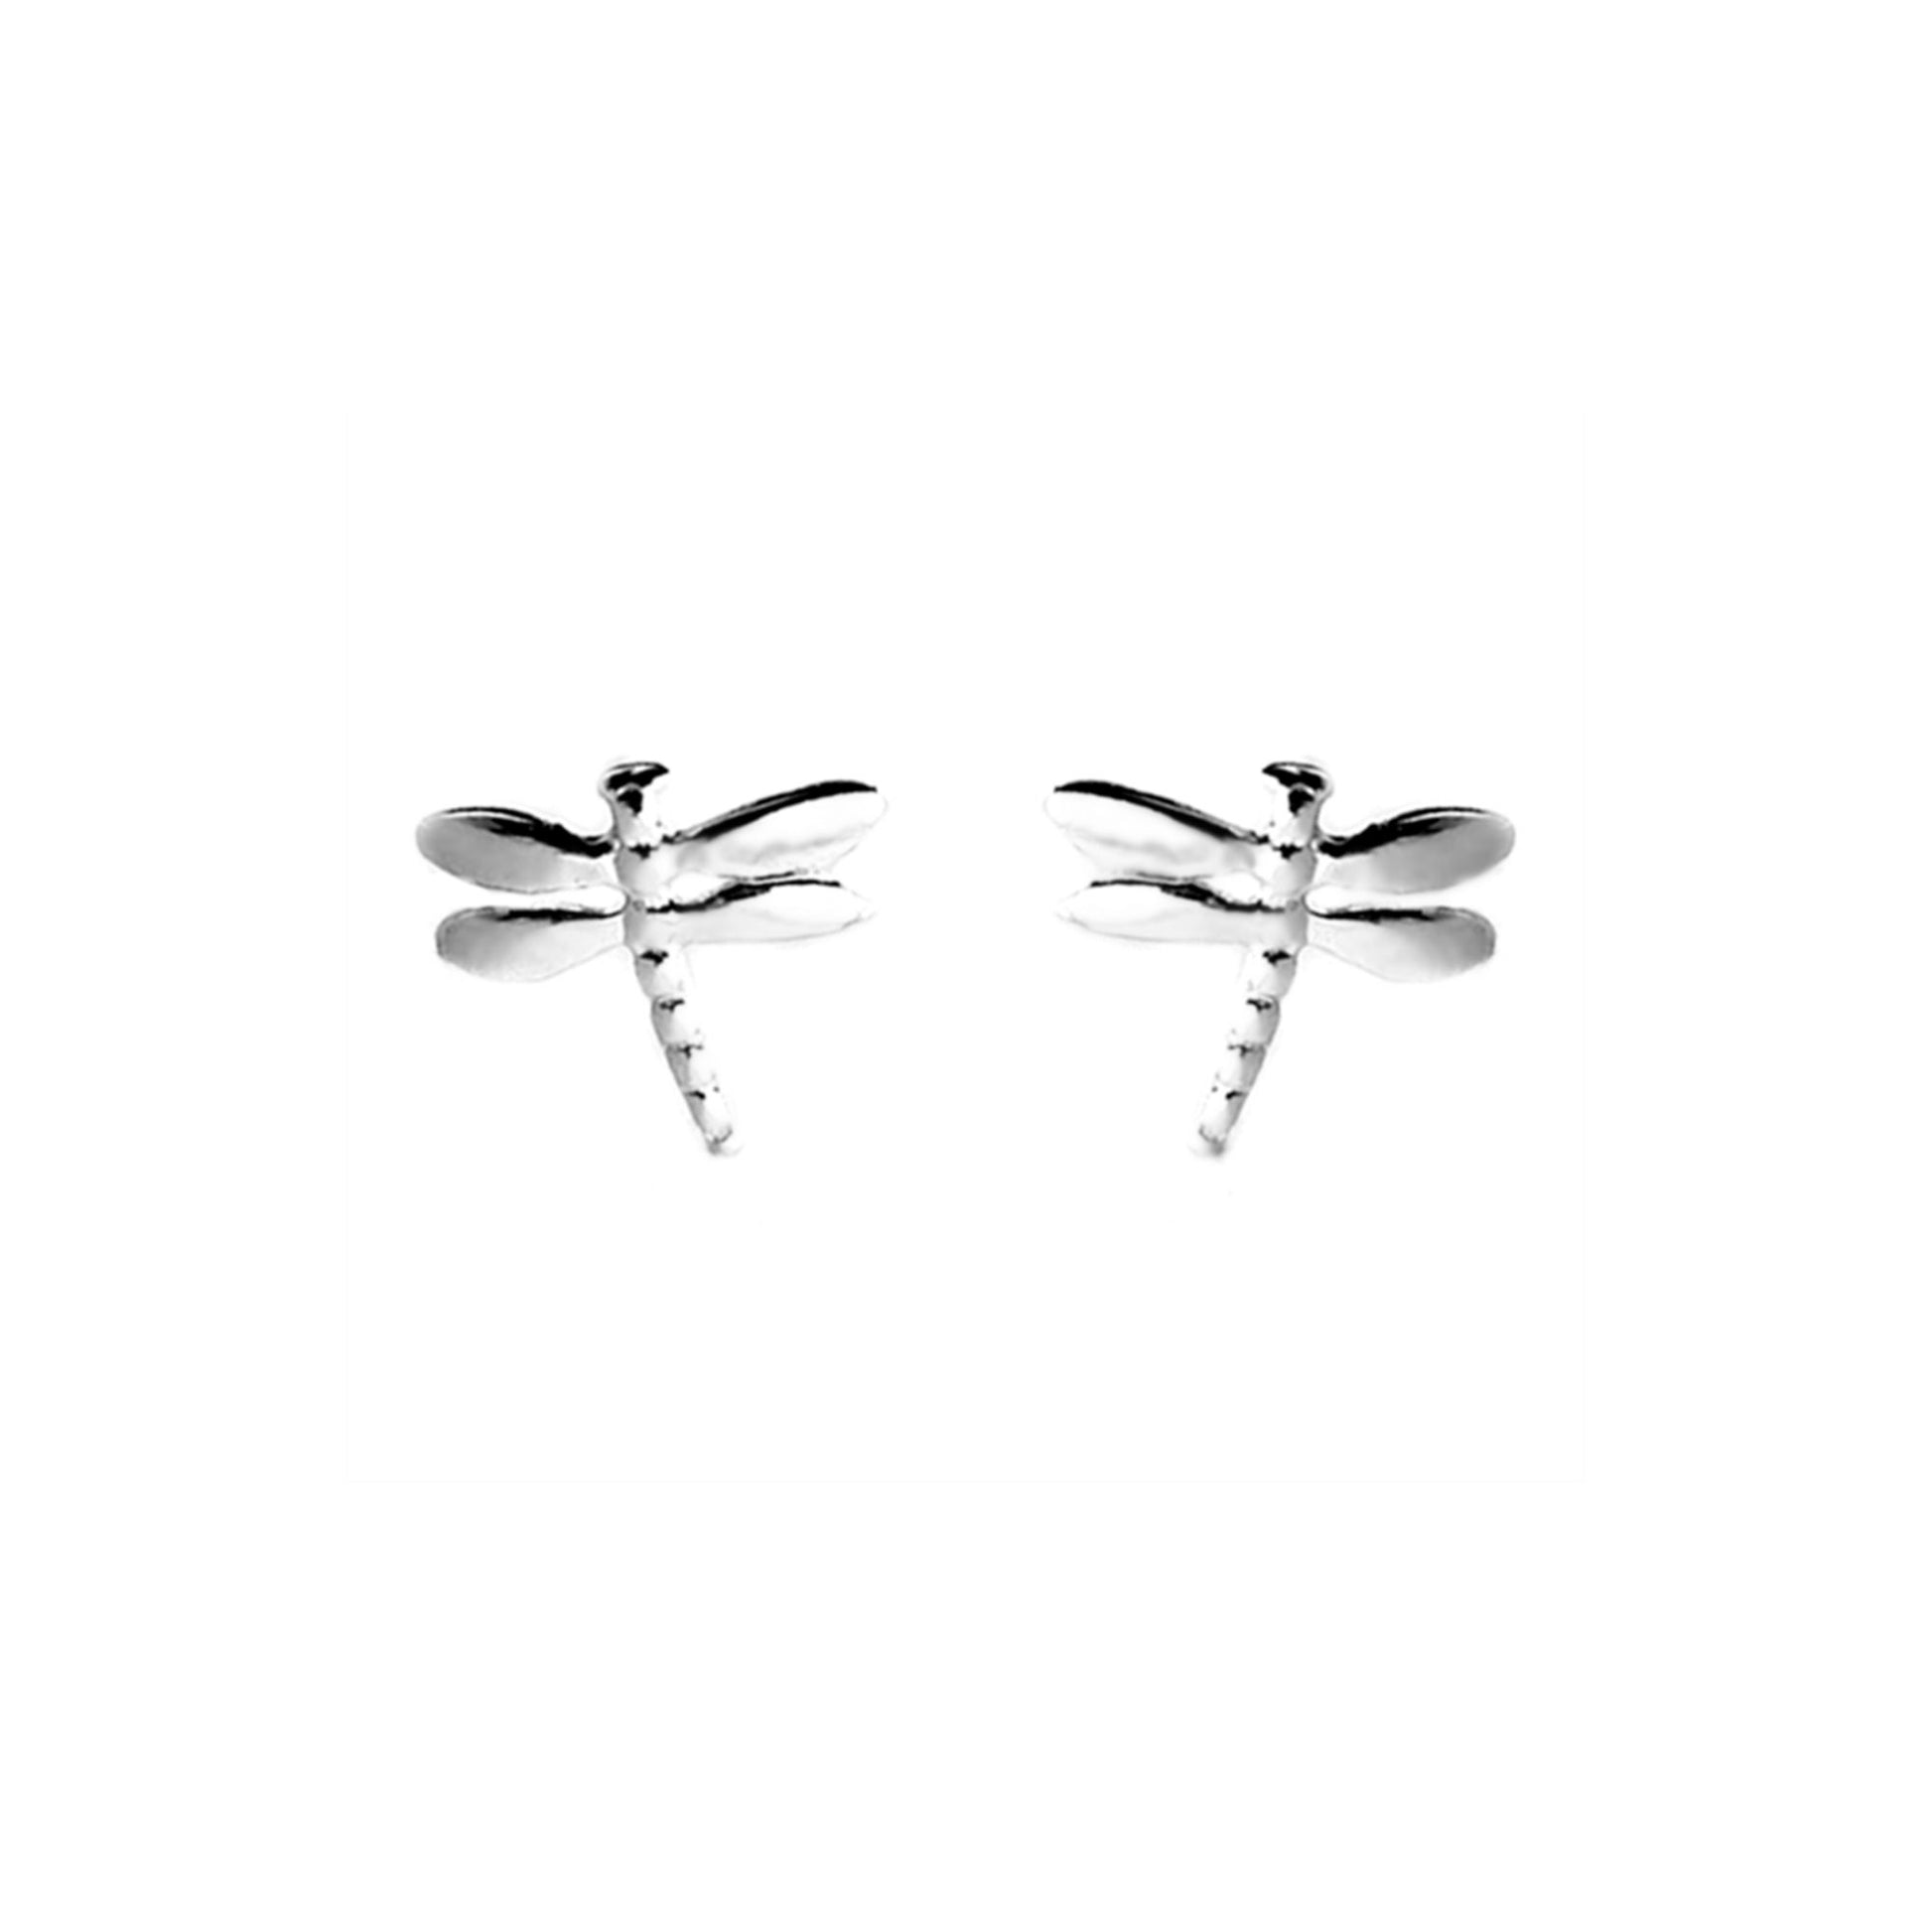 925 Sterling Silver Dragonfly Stud Earrings with Polished Finish - sugarkittenlondon